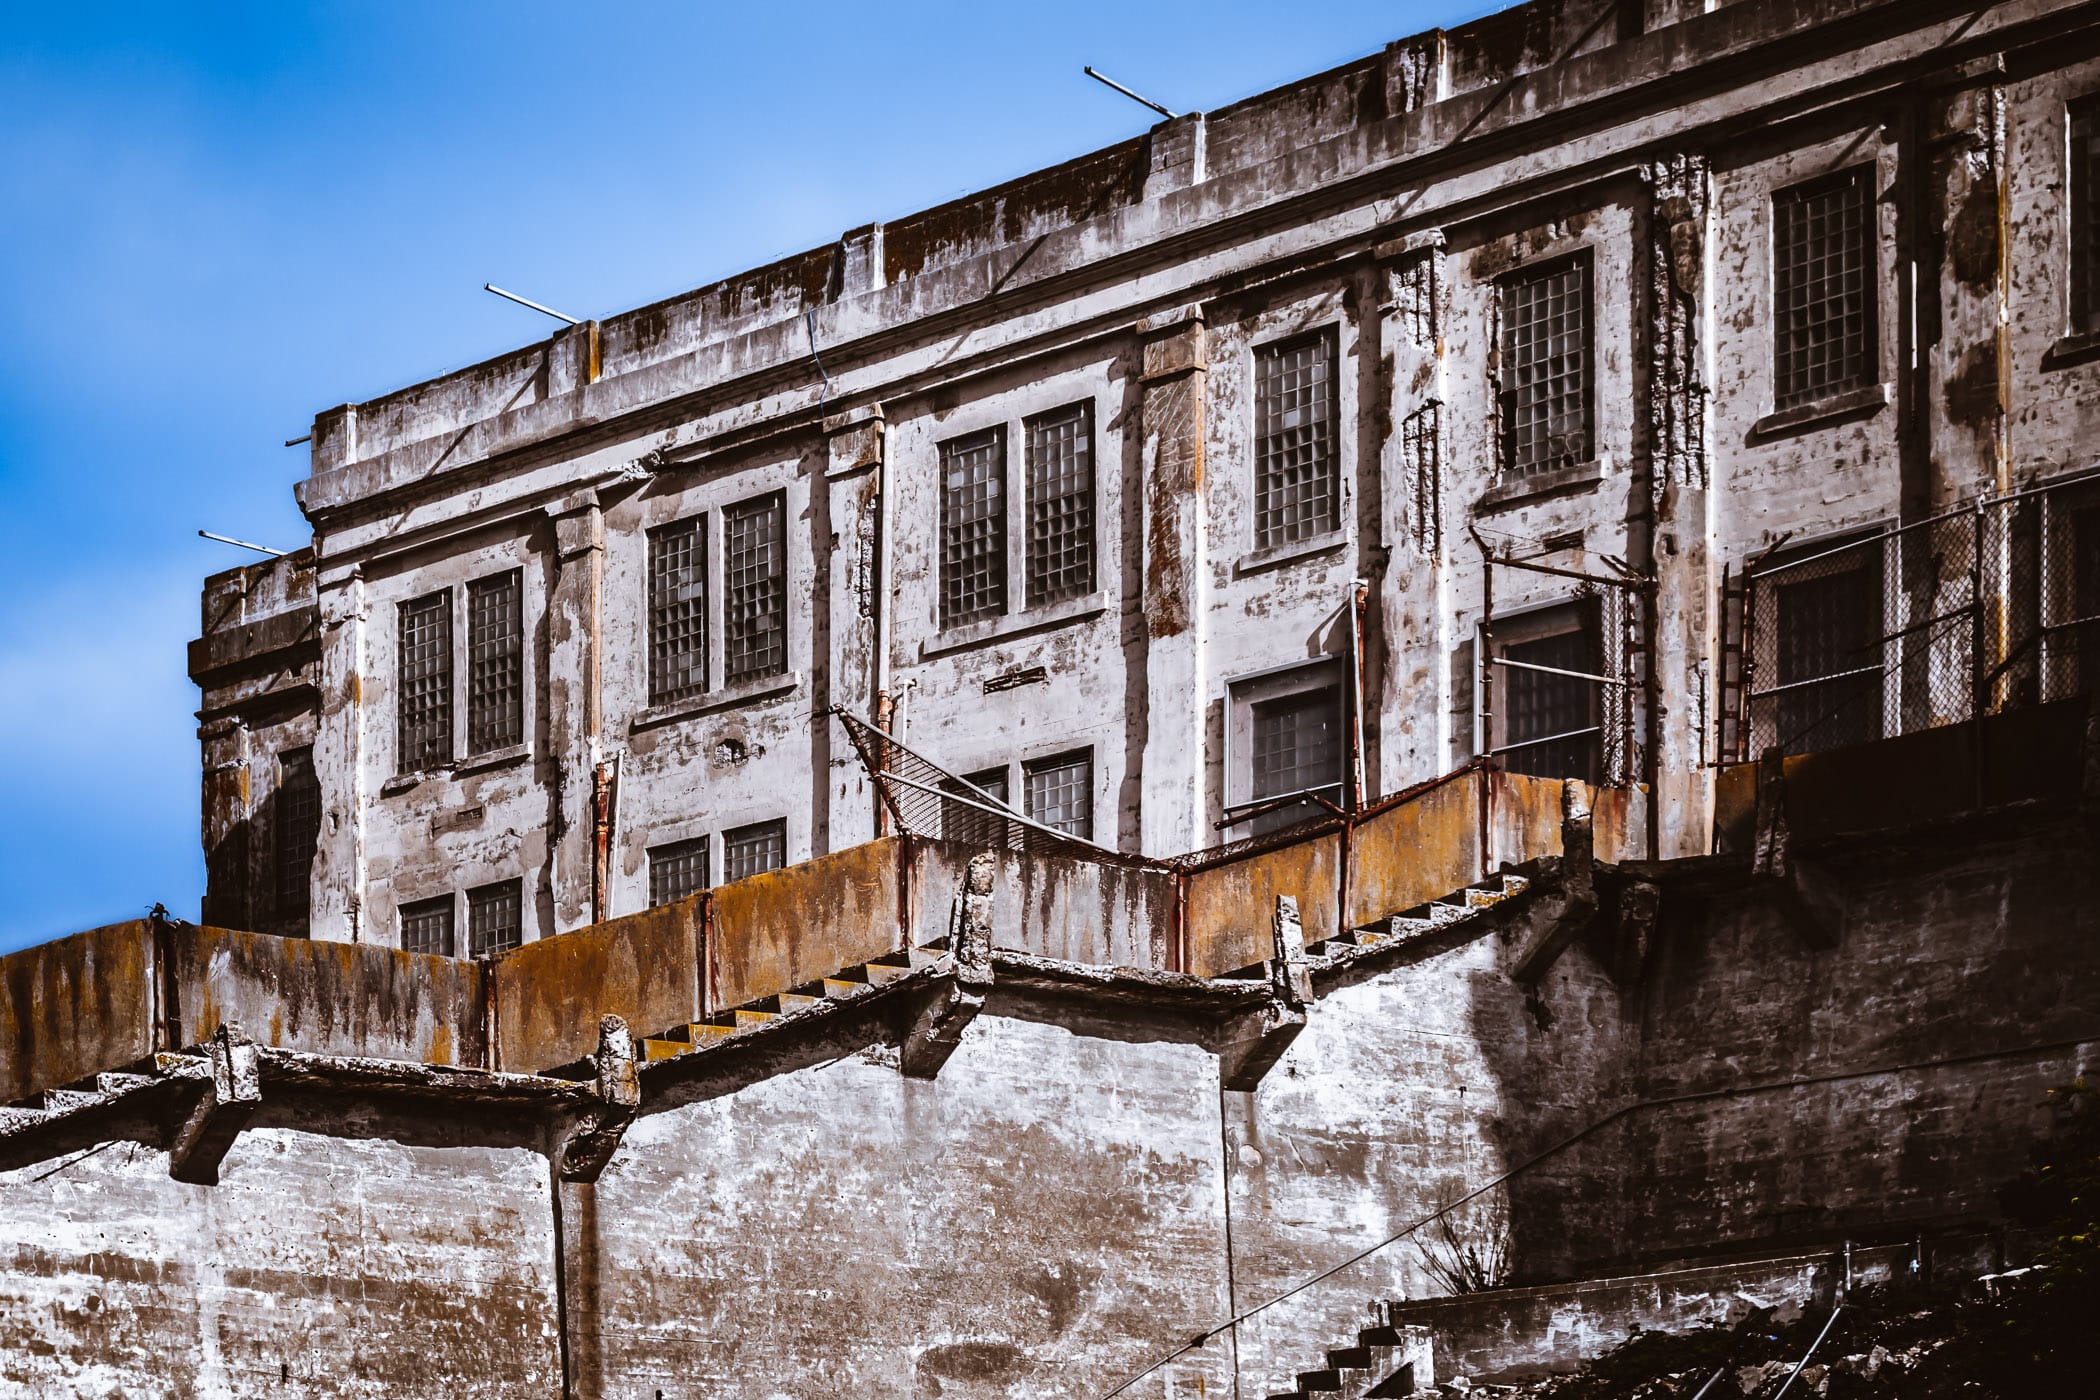 The main cell block at Alcatraz Prison in San Francisco decays in the elements.